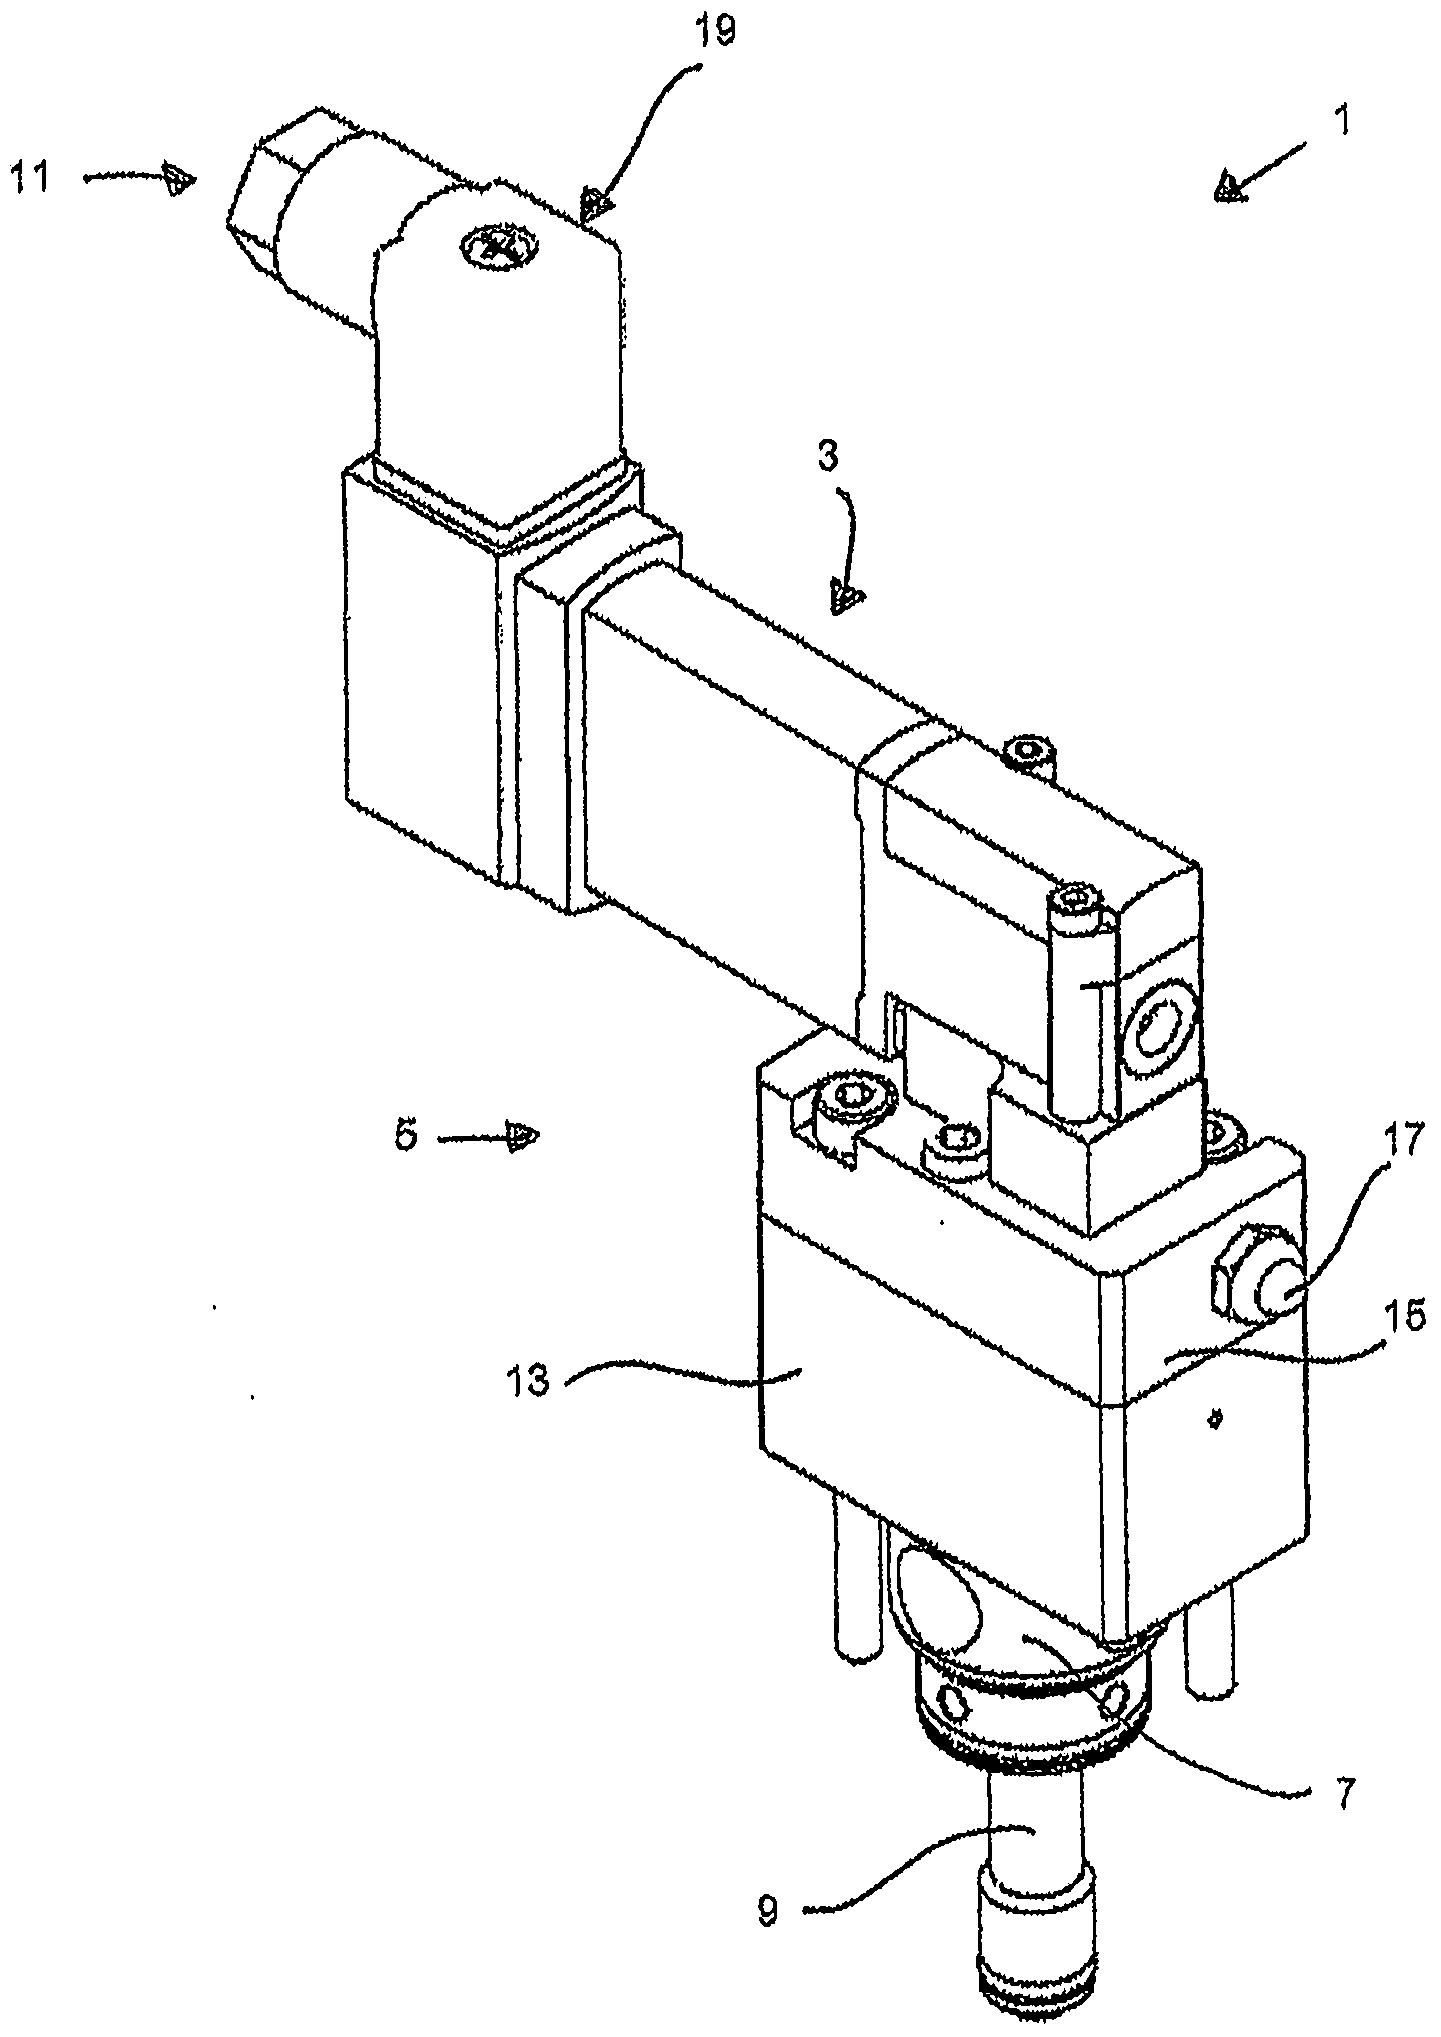 Dispensing module, applicator head and nozzle holder for dispensing a fluid, in particular hot-melt adhesive